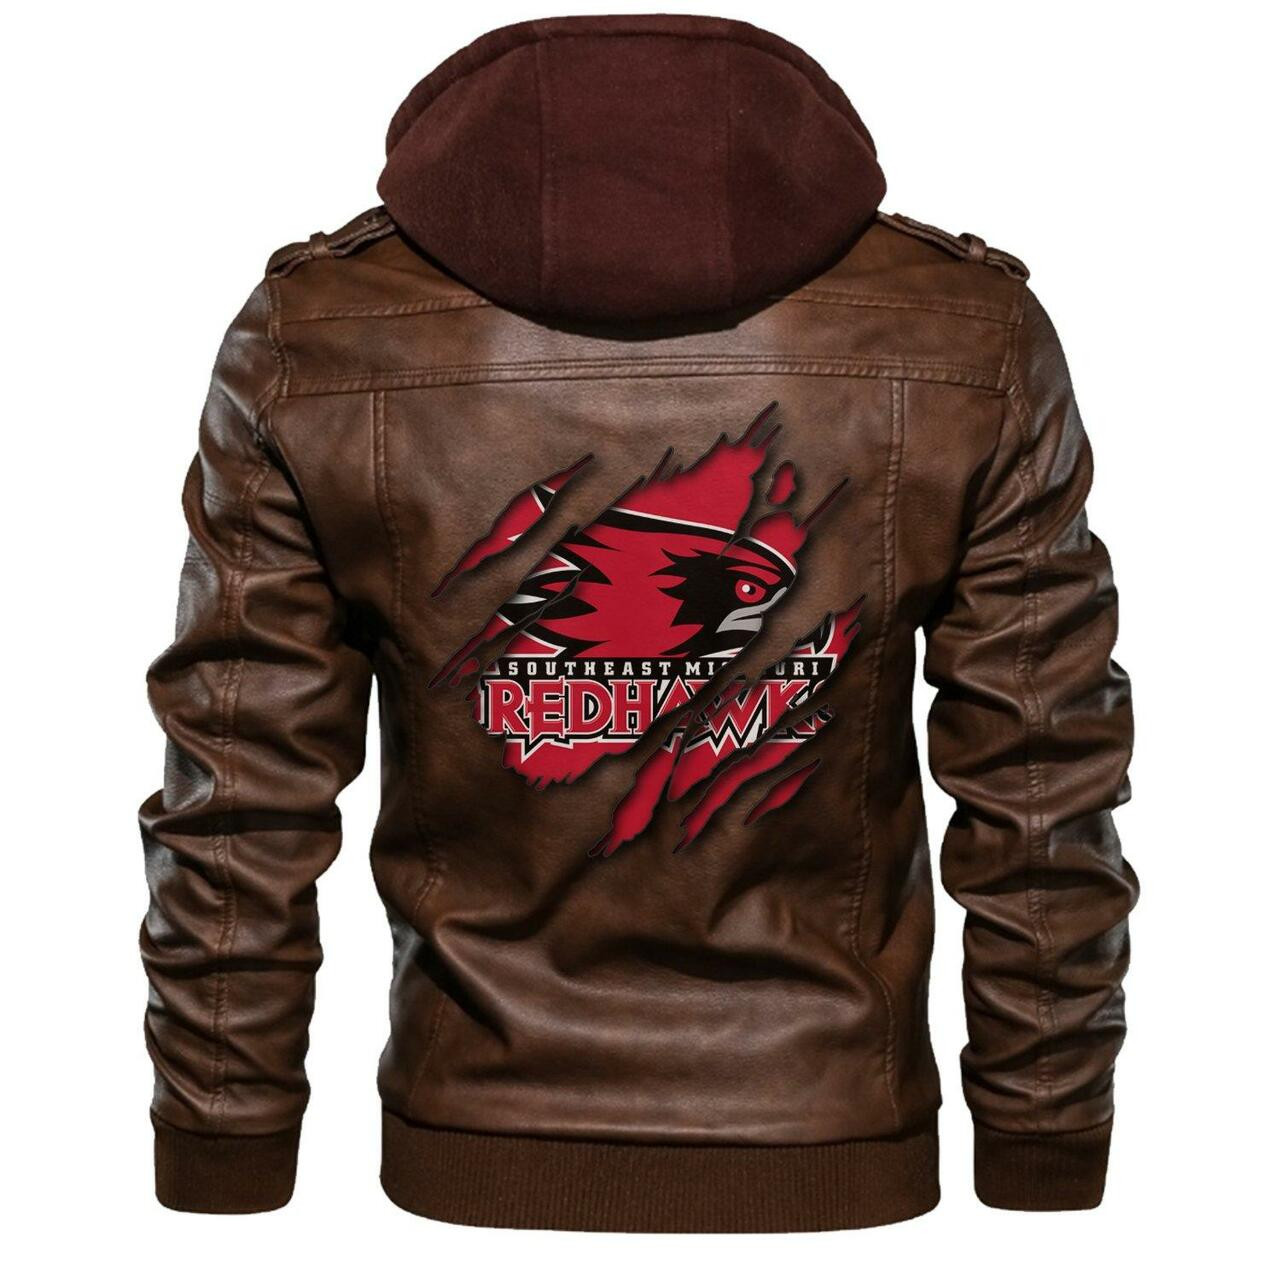 Our store has all of the latest leather jacket 113